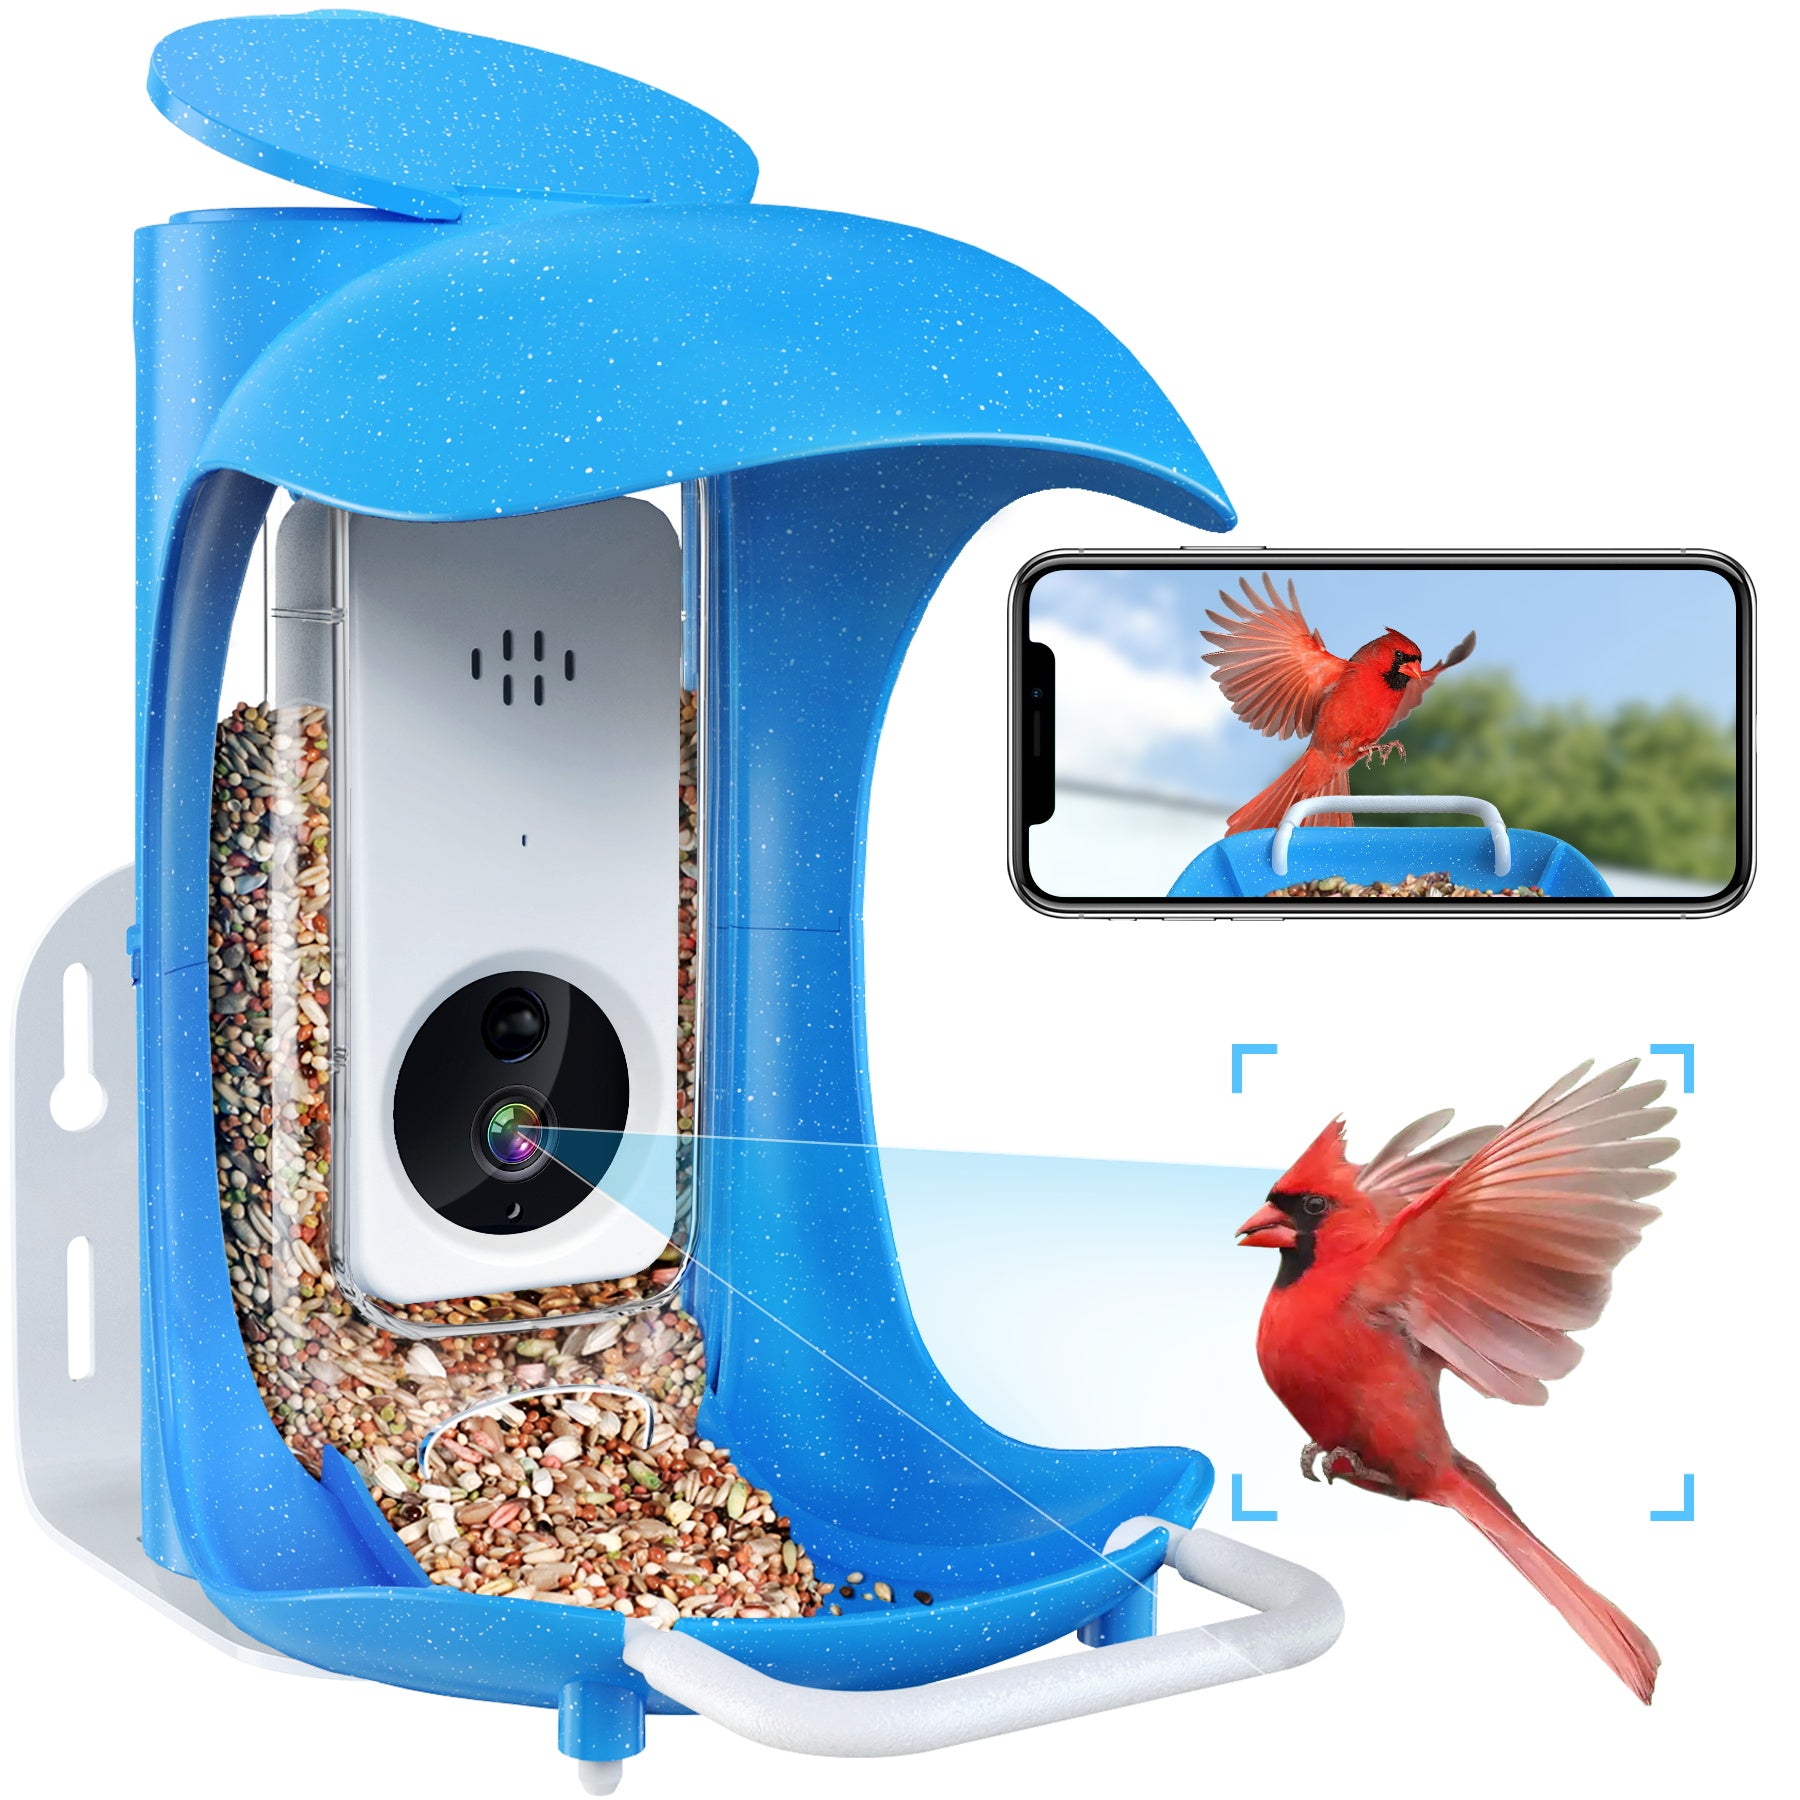 Happy Birds ! a World of Connected Bird Feeders / Connectez Vous